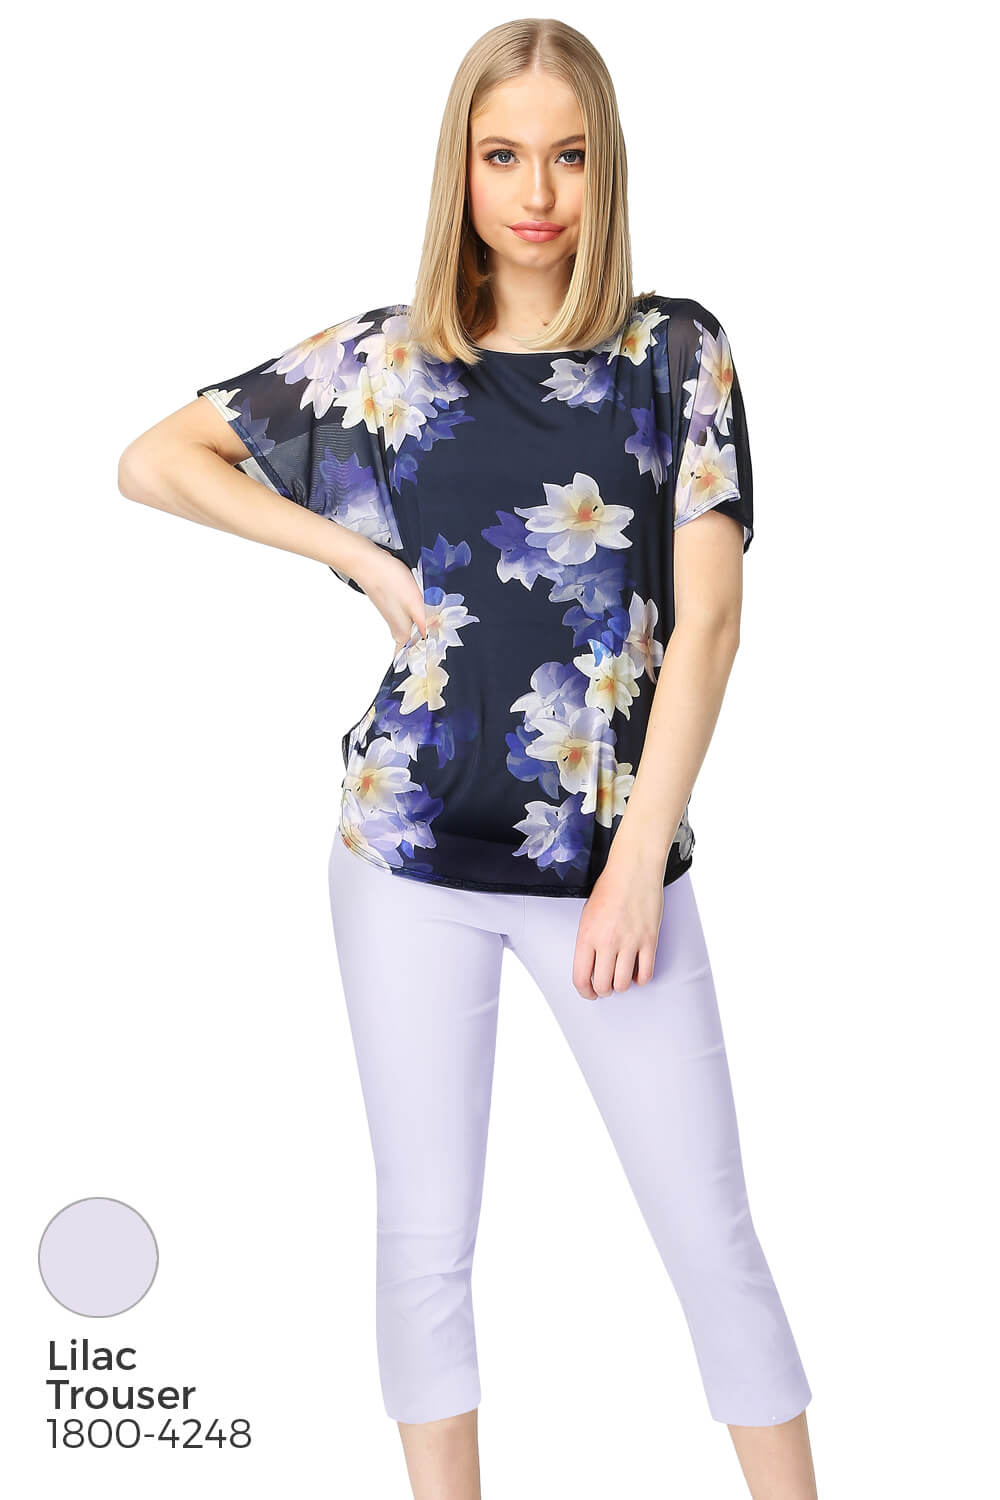 Blue Floral Chiffon Overlay Top, Image 8 of 8